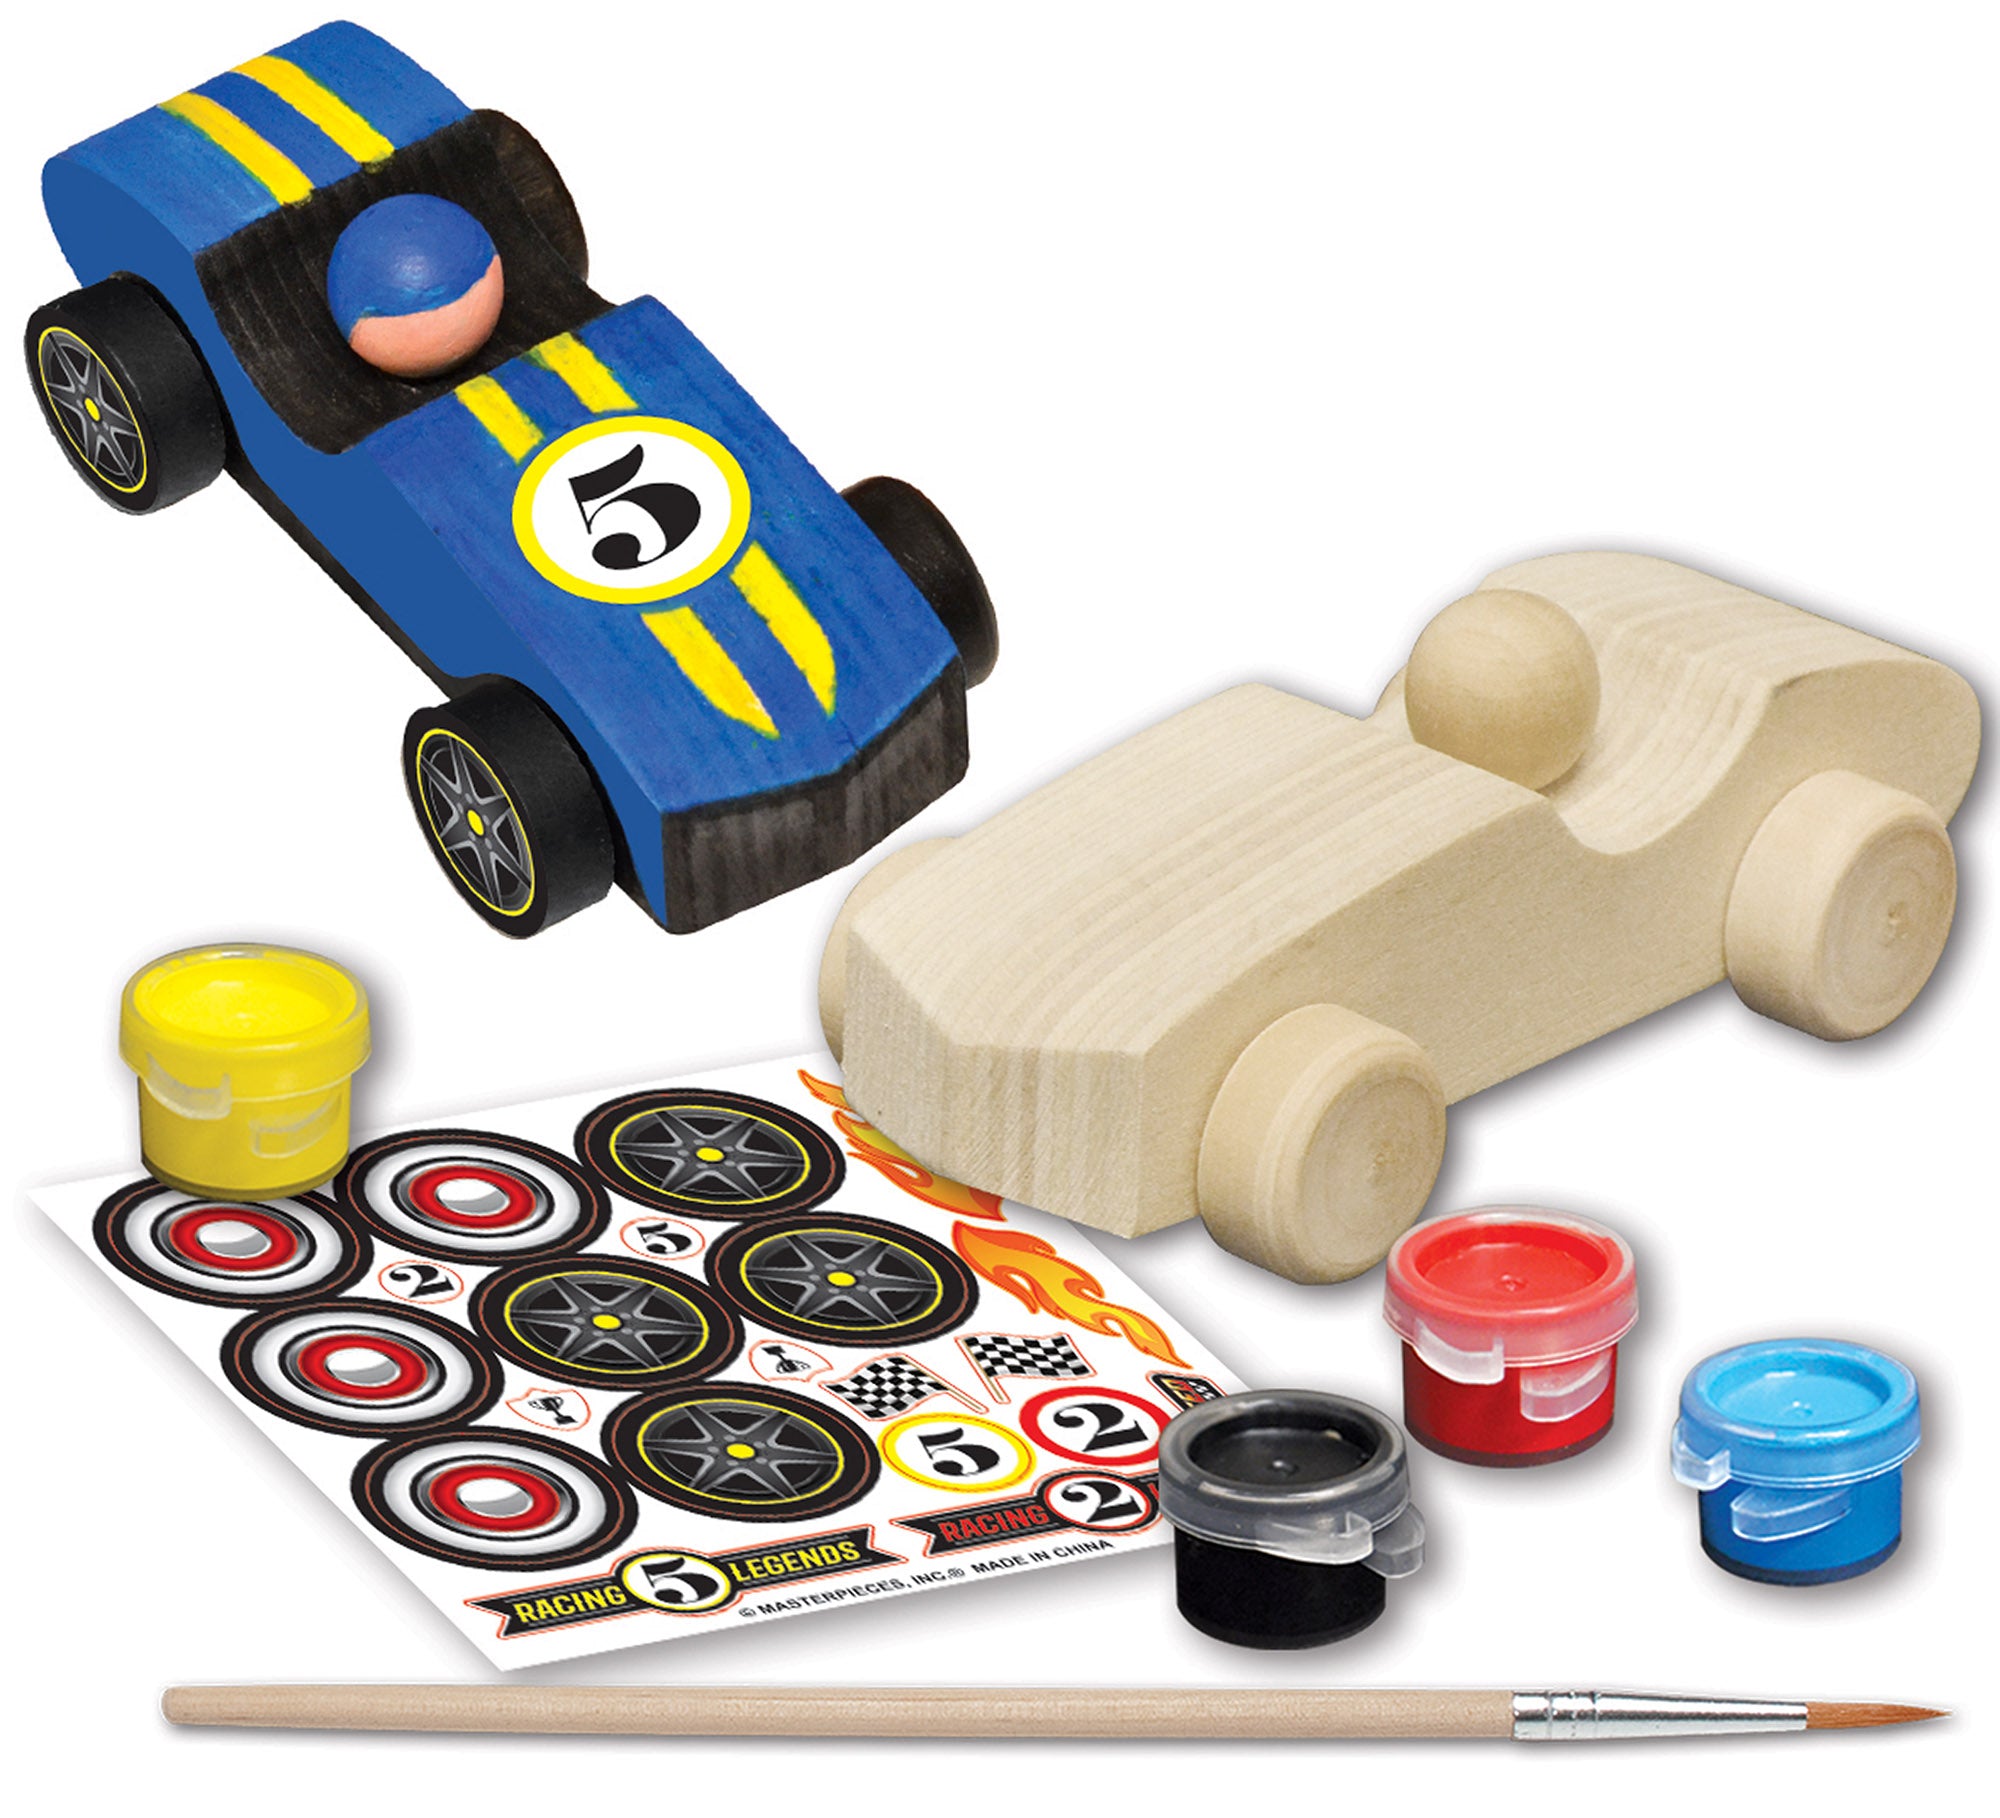 Reasons Why A Wood Craft Kit Can Help Your Child's Imagination